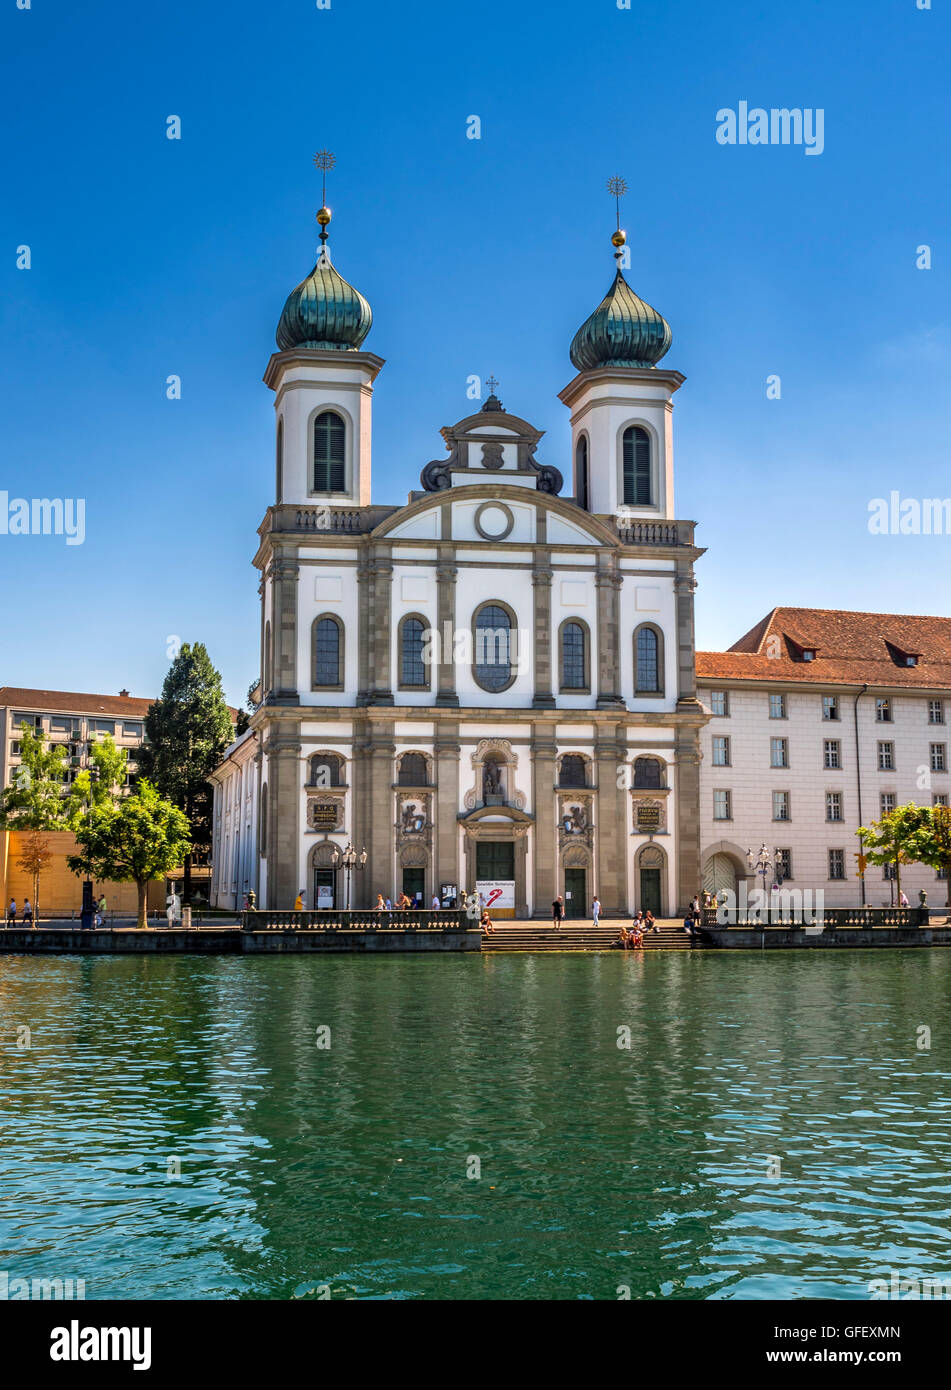 Old Town and Jesuit Church on the River Reuss in Lucerne, Switzerland, Europe Stock Photo